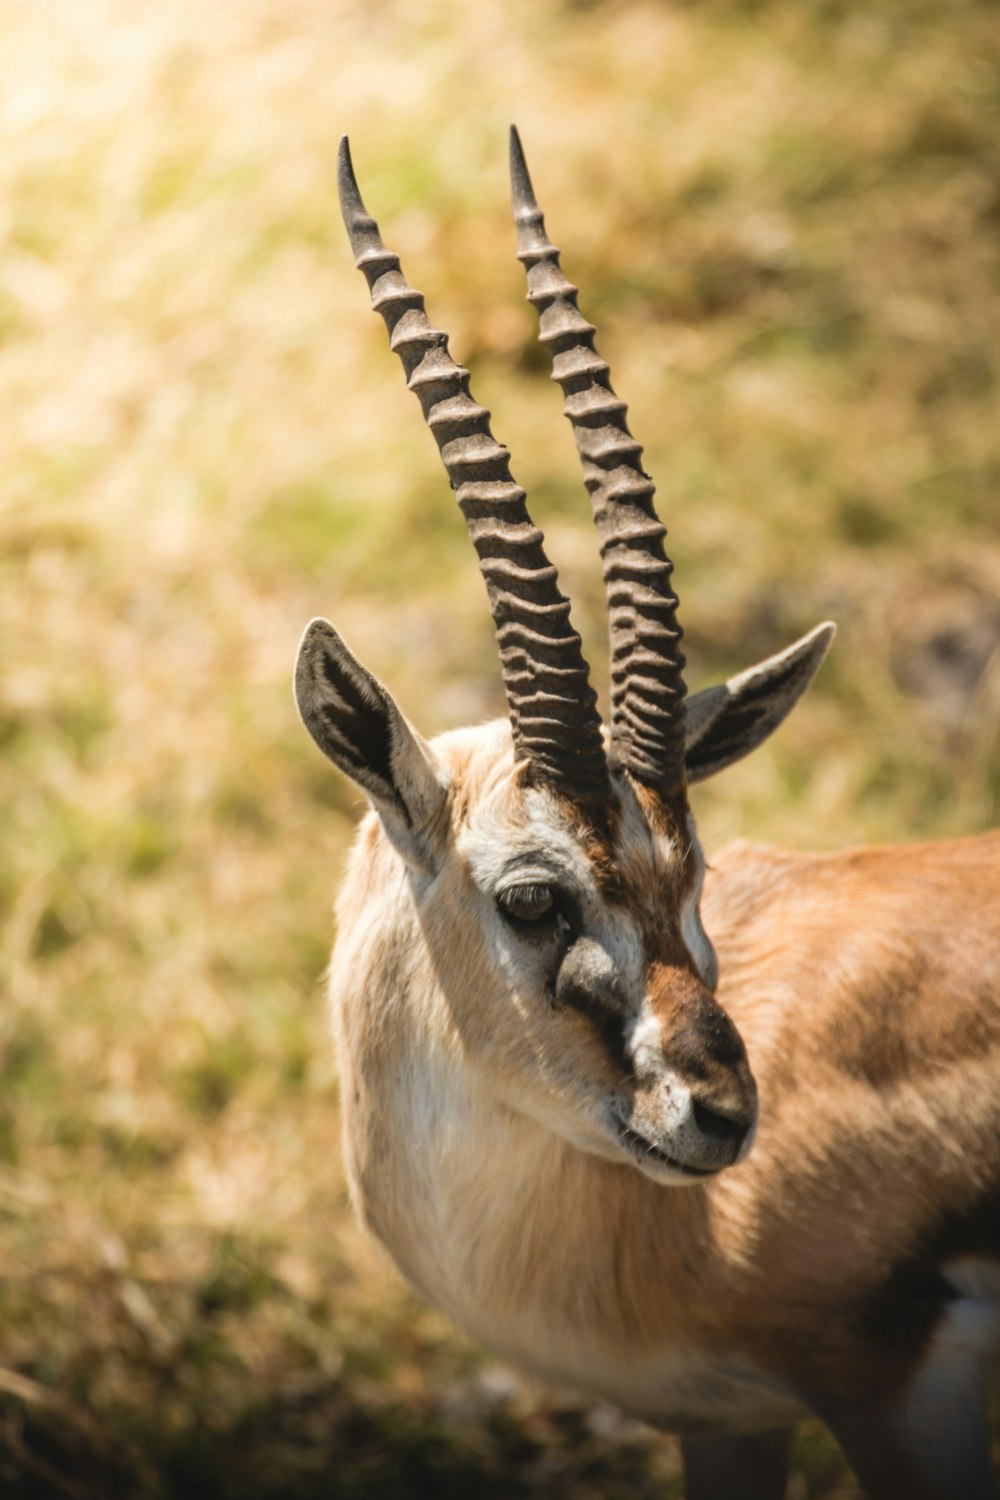 a gazelle with very long horns standing in the grass